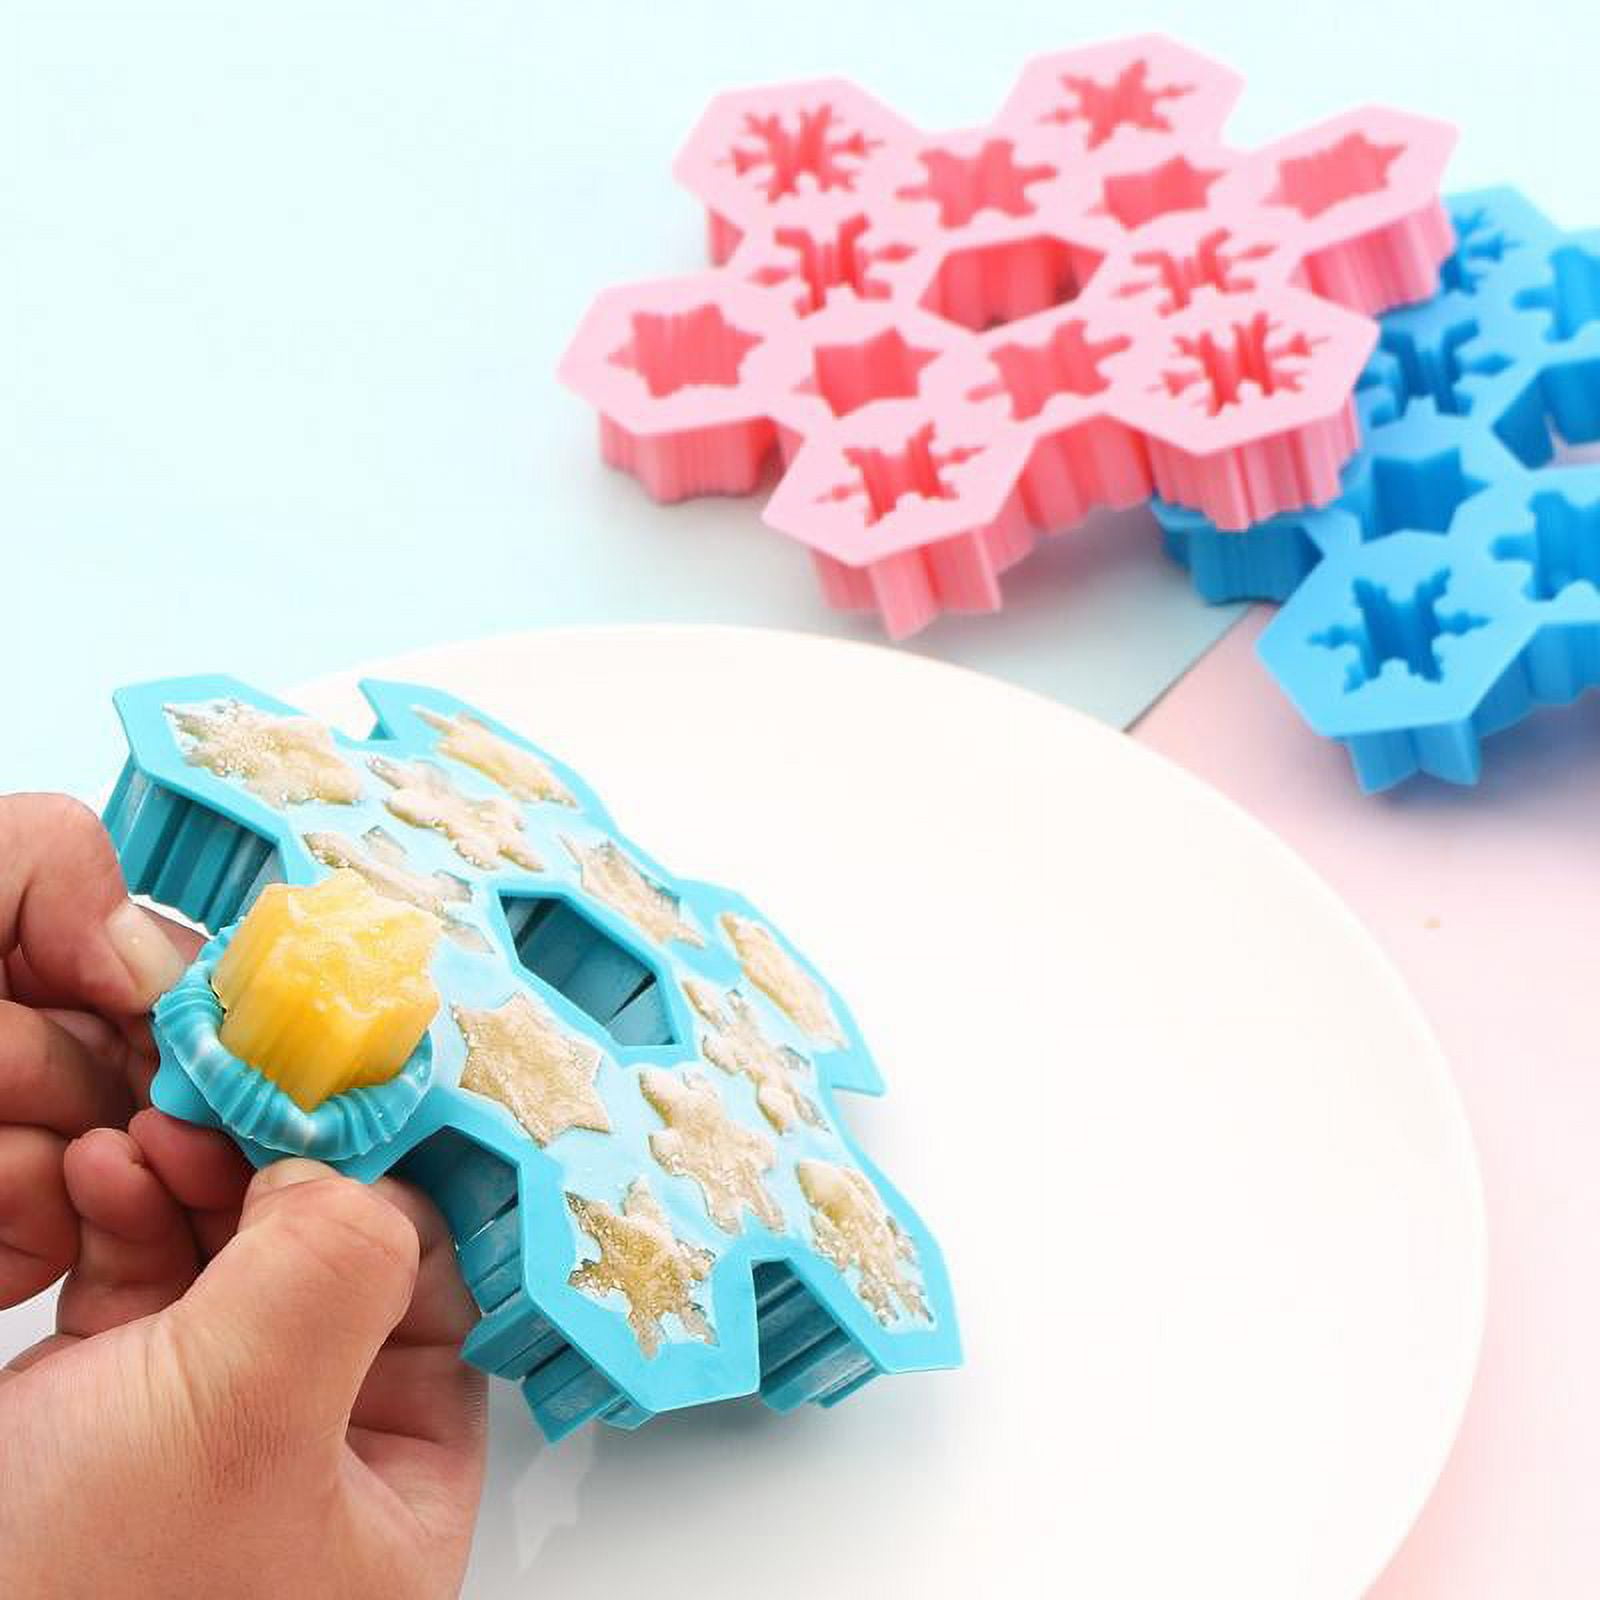 Set Of 6 Rubber Ice Cube Candy Molds - Fish, Flowers, Stars, Tree, Snowflake